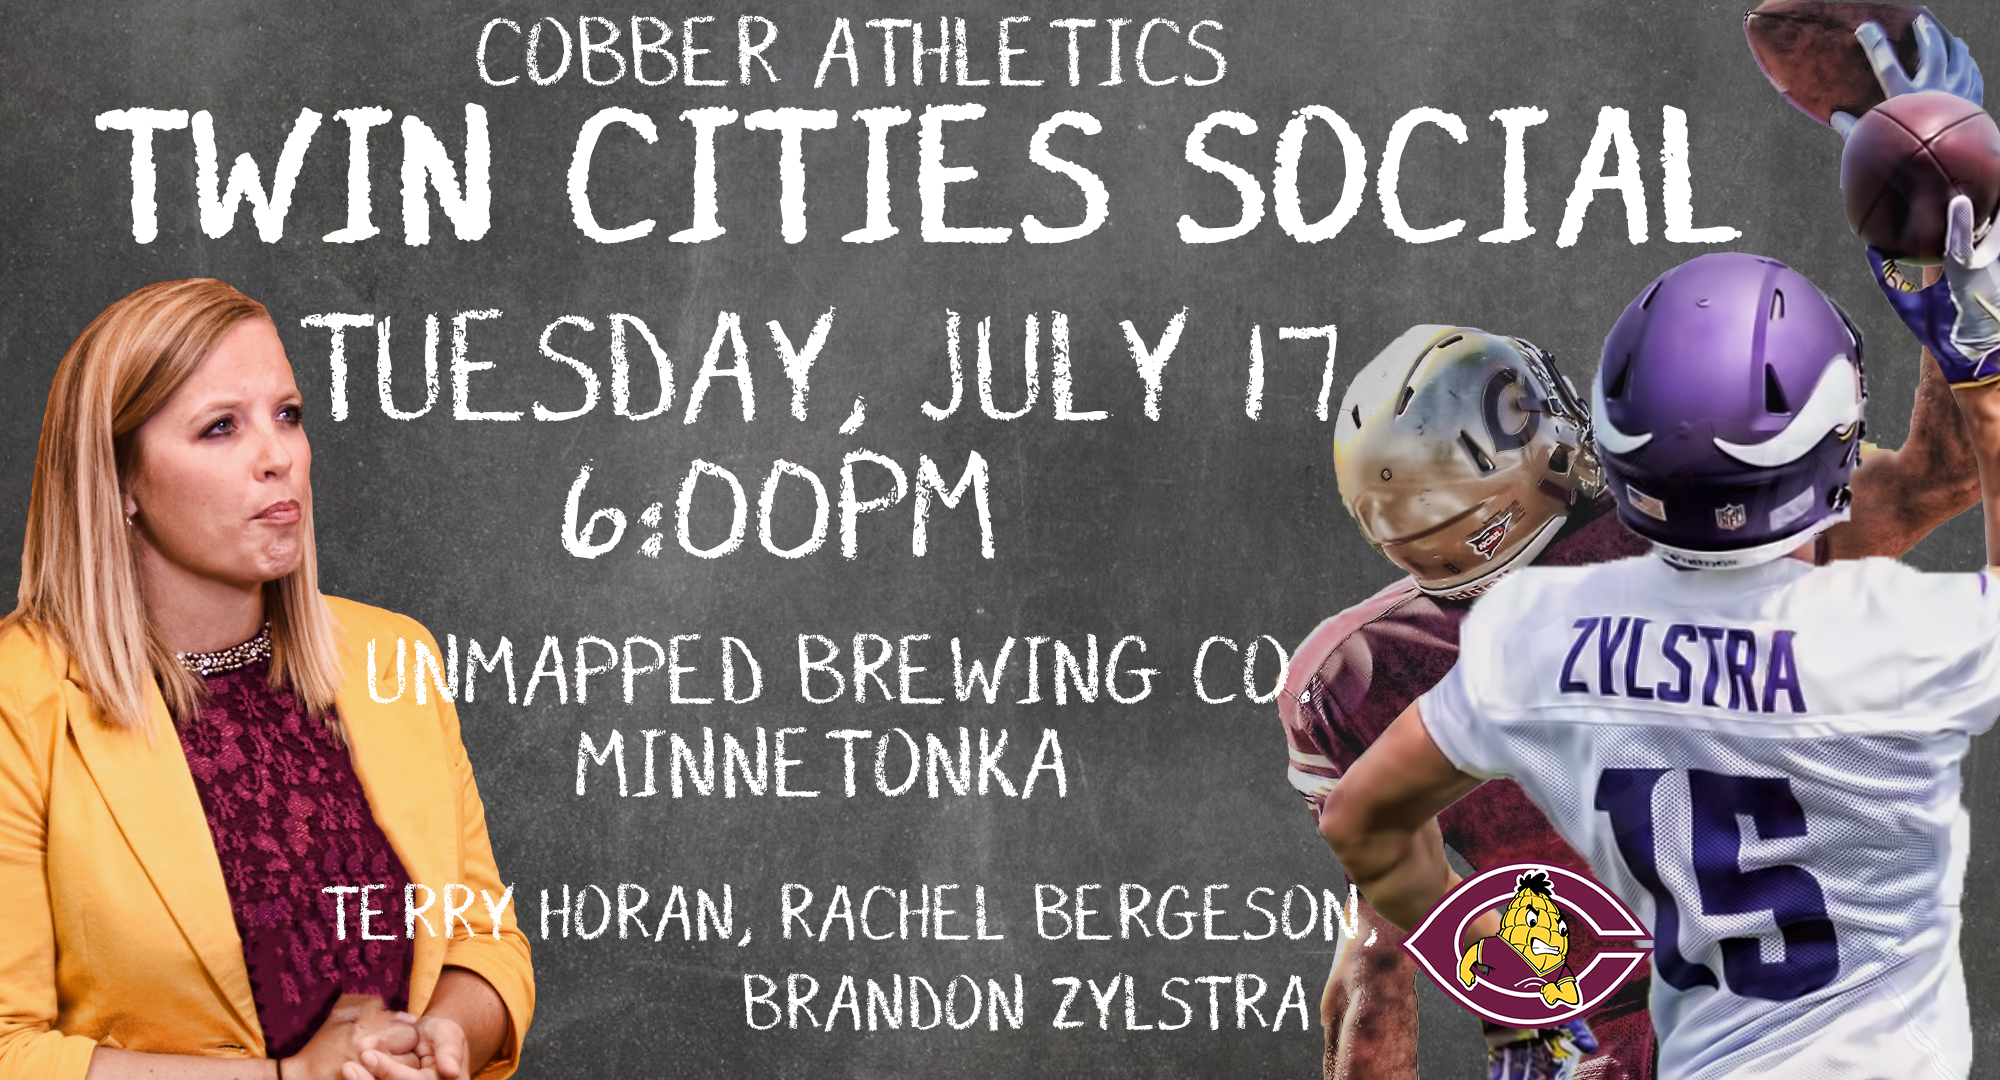 Cobber Athletic Twin Cities Social